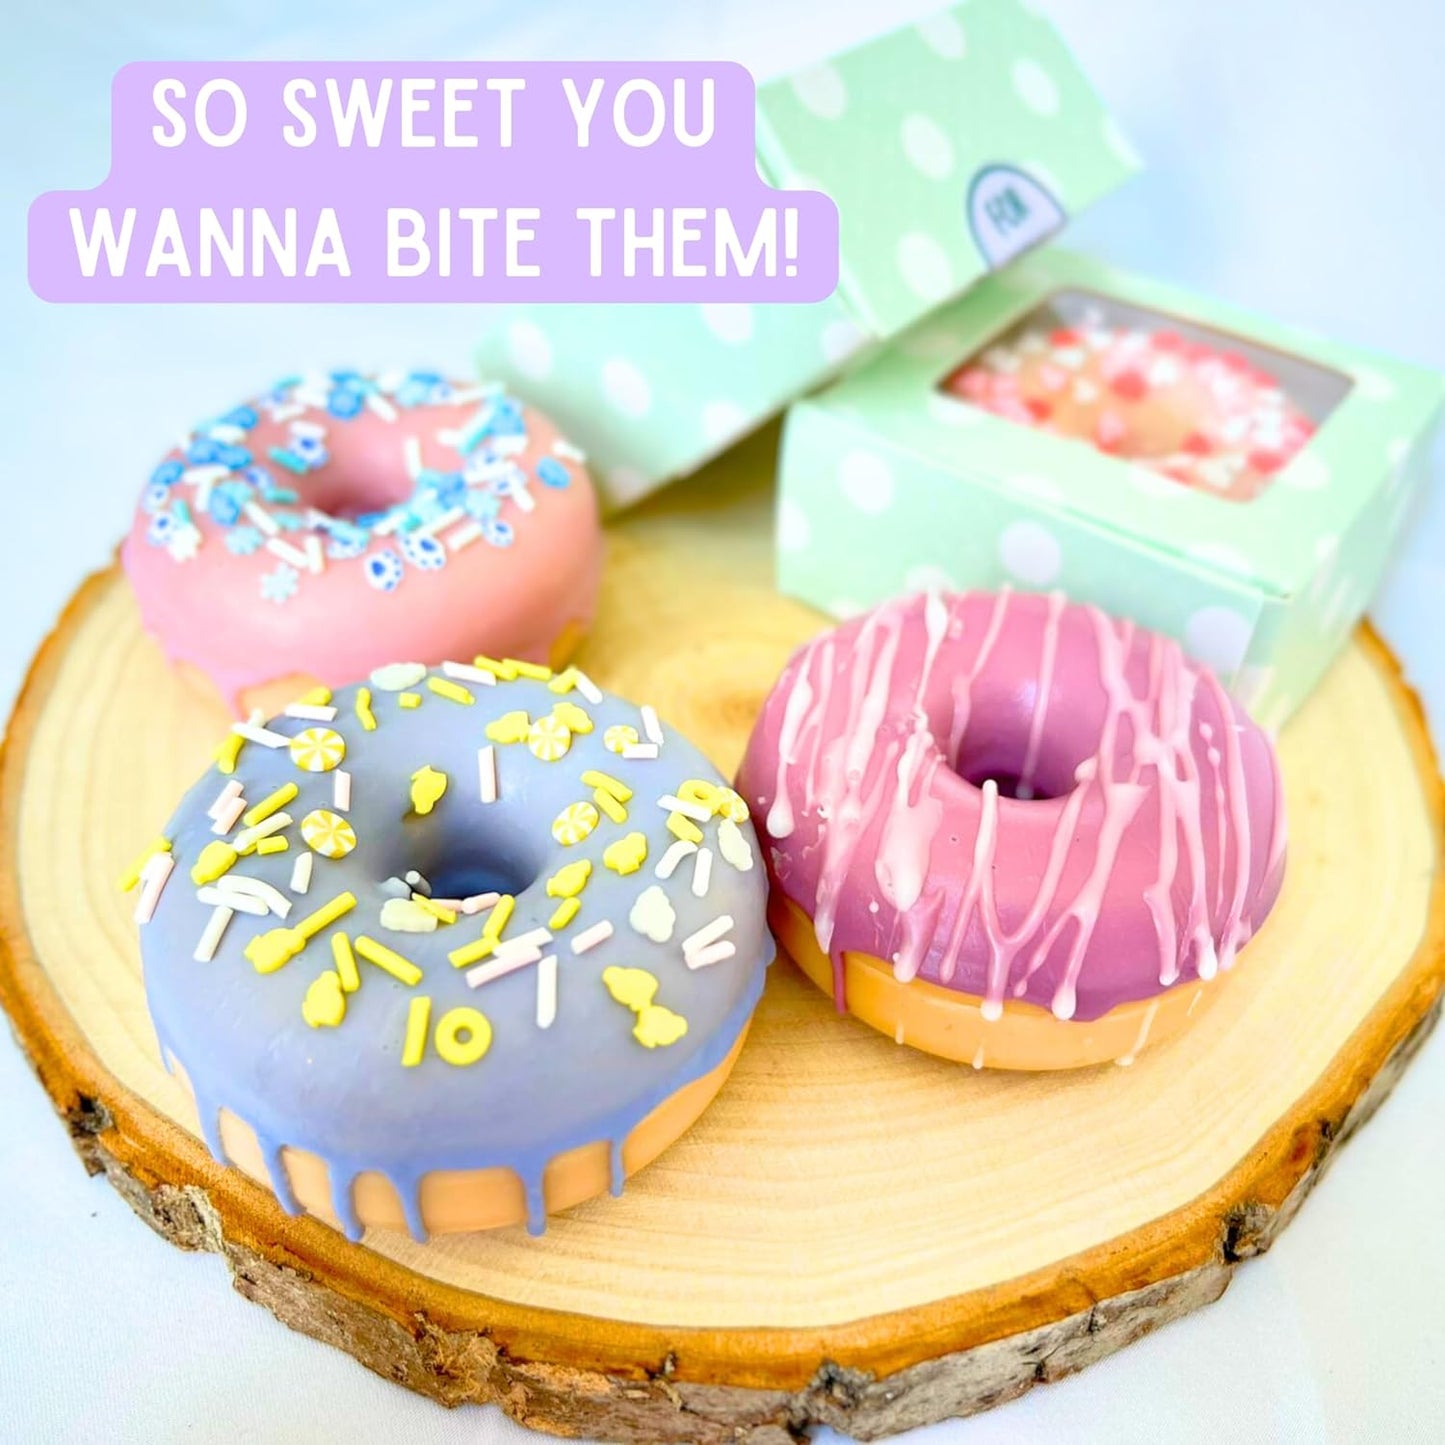 DIY Donut Soap Making Craft Kit for Kids, Teens, and Adults - Fun, Easy, Creative - Large Soap Donuts - Perfect Birthday & Holiday Gift - High Quality, Mess-Free, All-In-One Kit - Loved by All Ages!